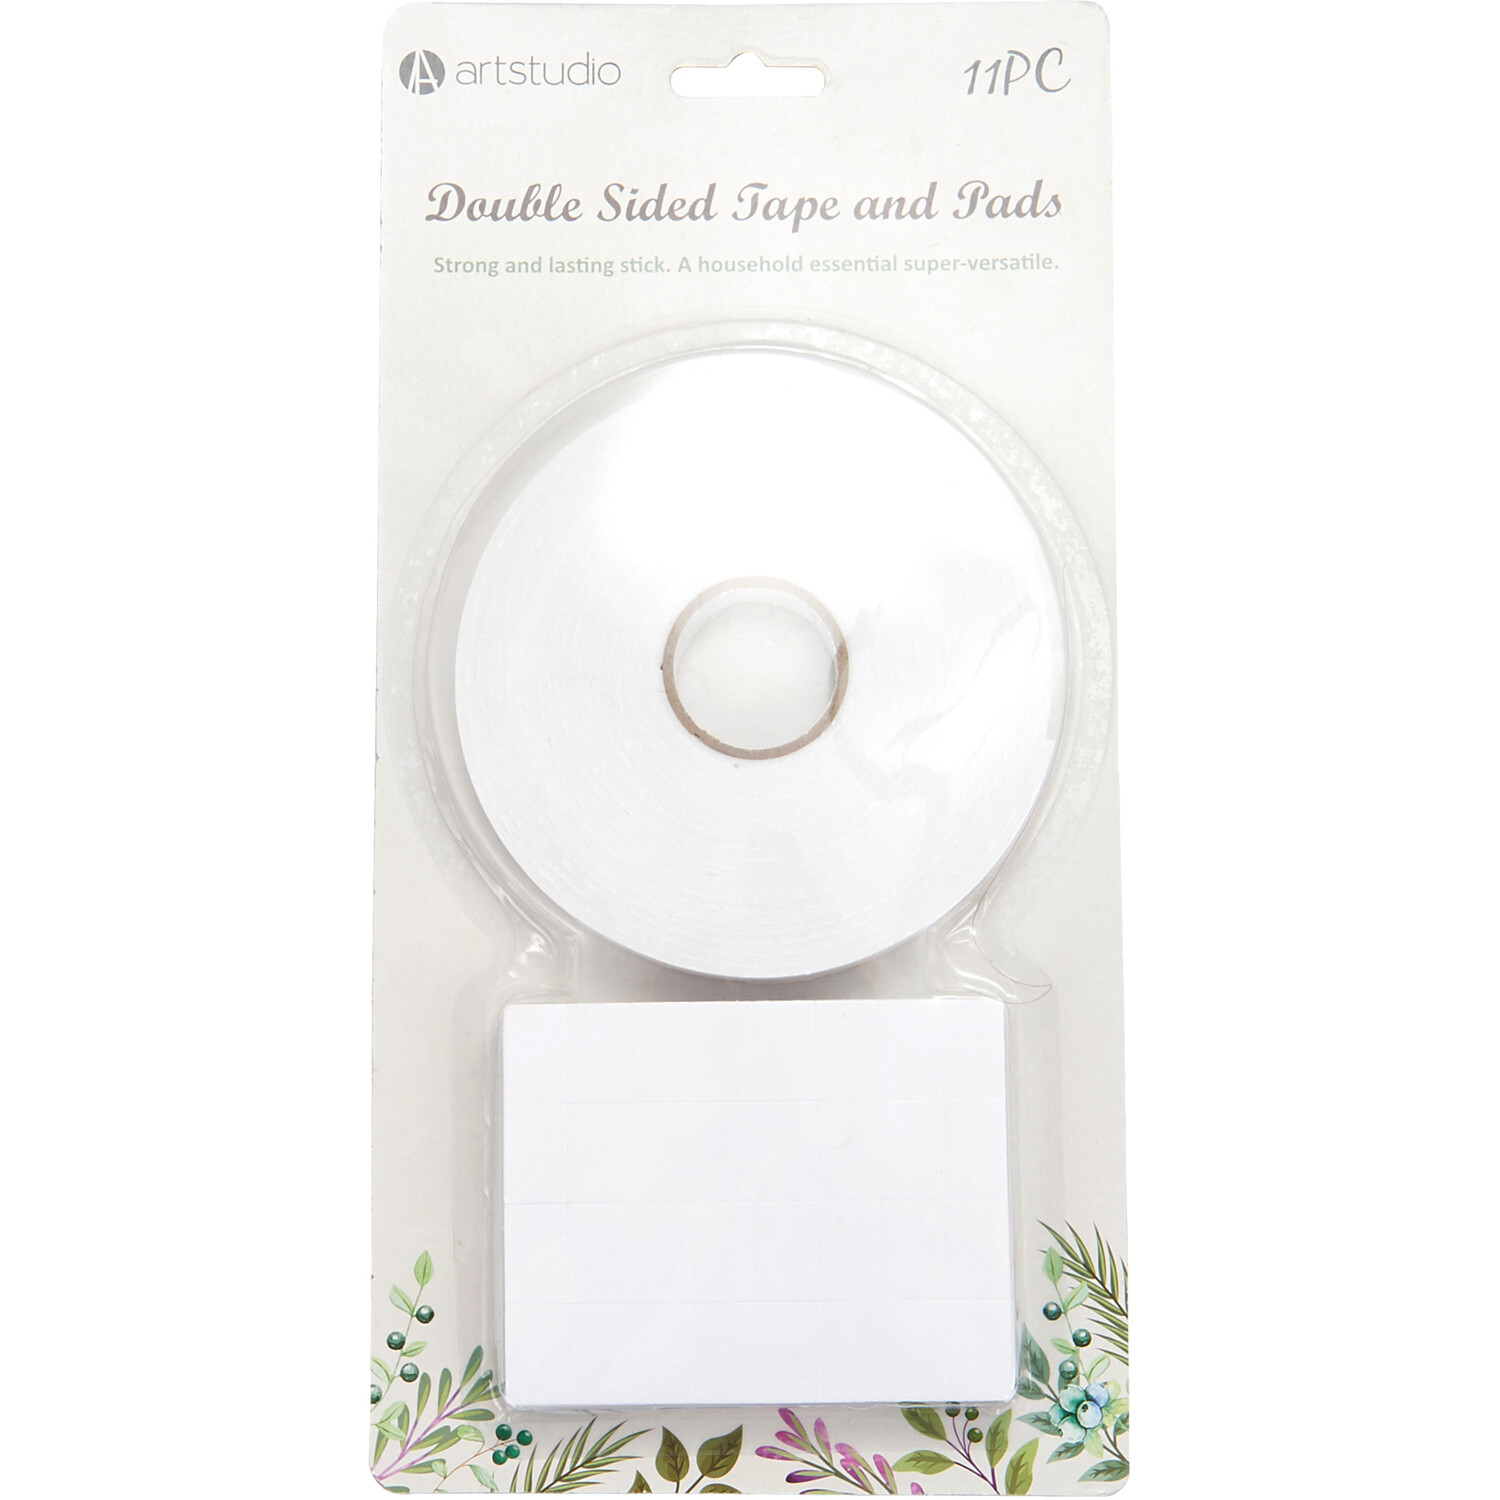 Art Studio Double Sided Tape and Pads Image 1